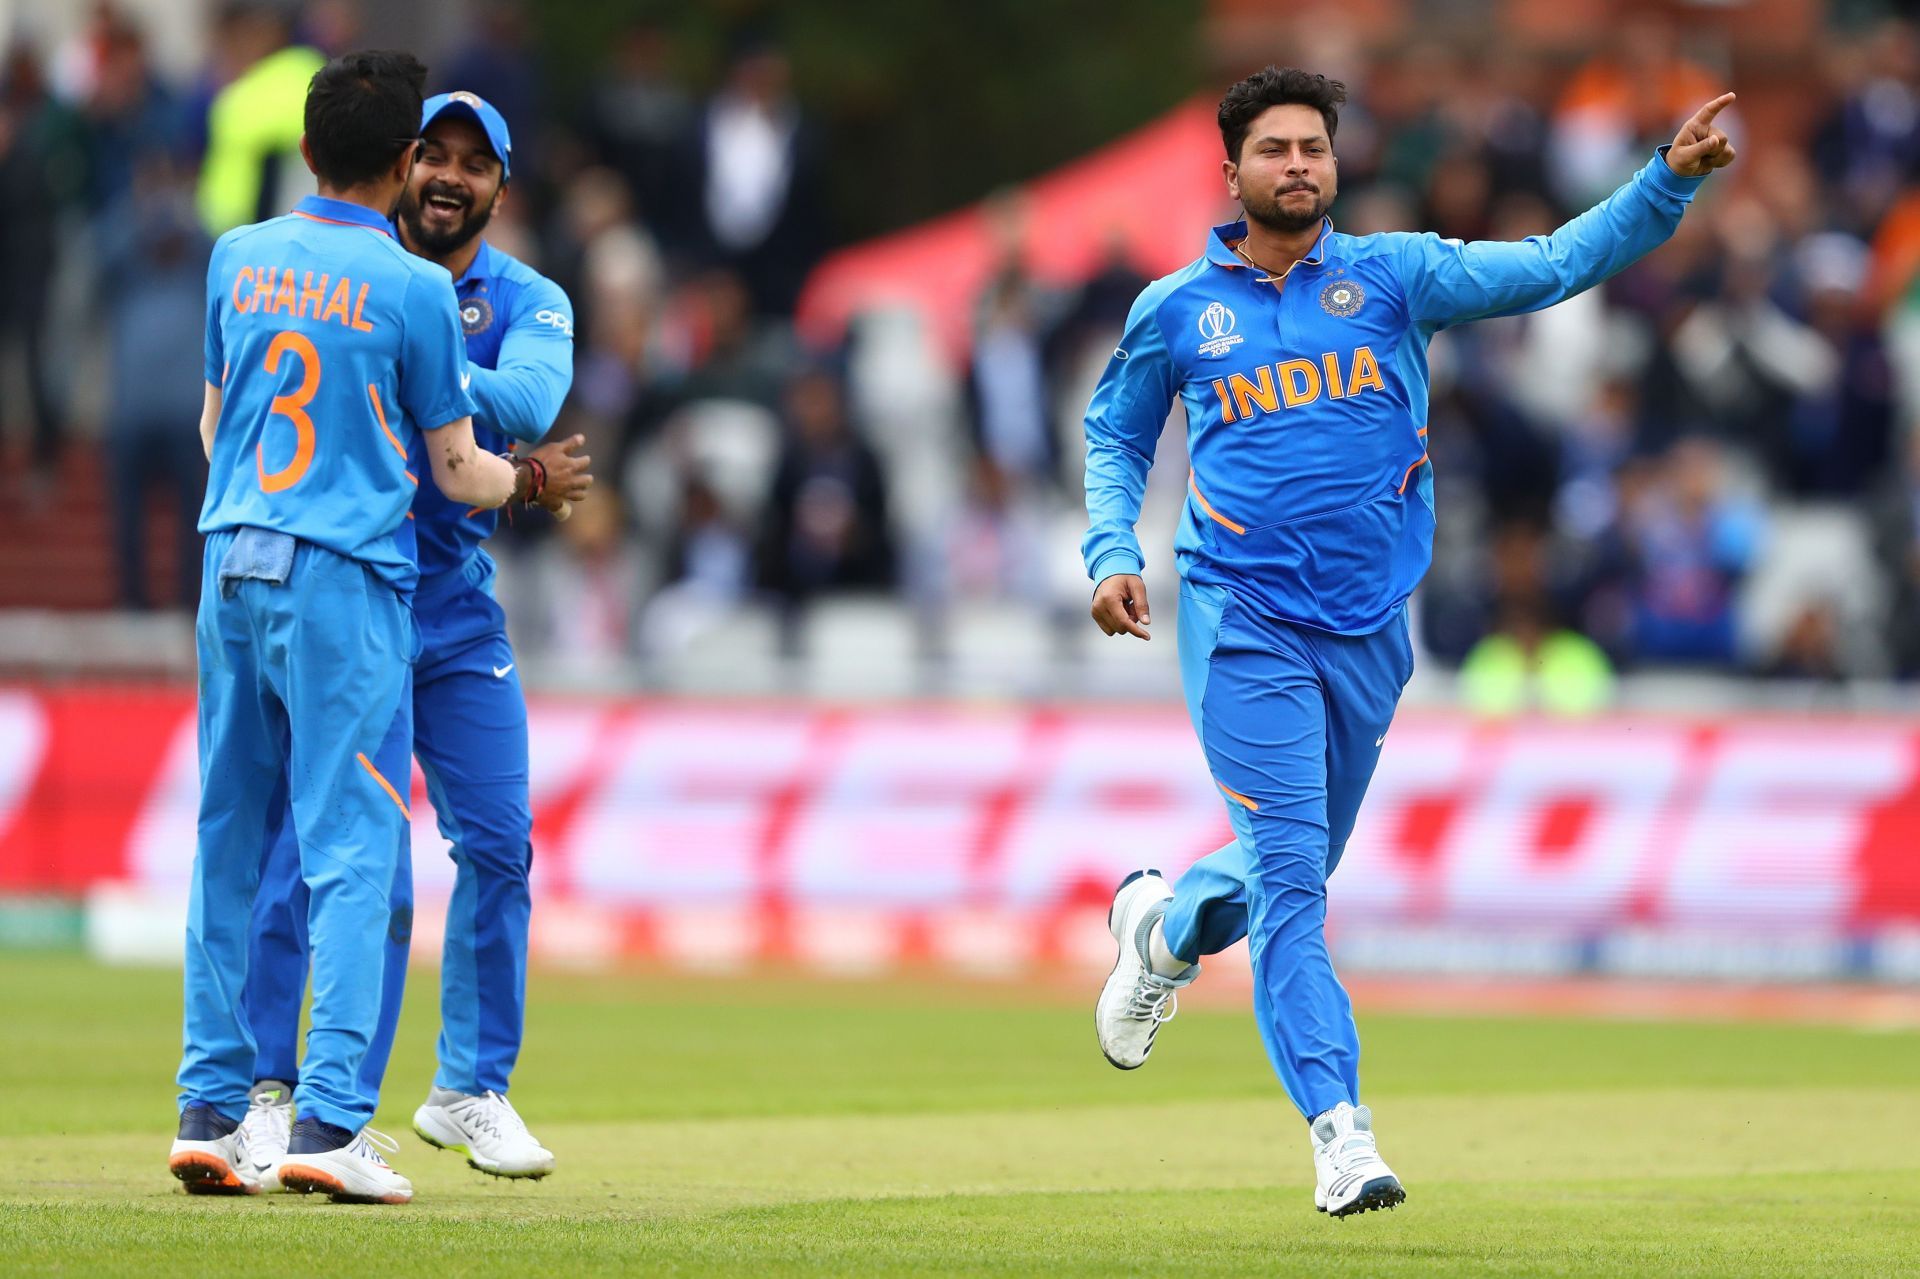 Kuldeep Yadav had a very successful run with the Indian ODI and T20I team before losing his place